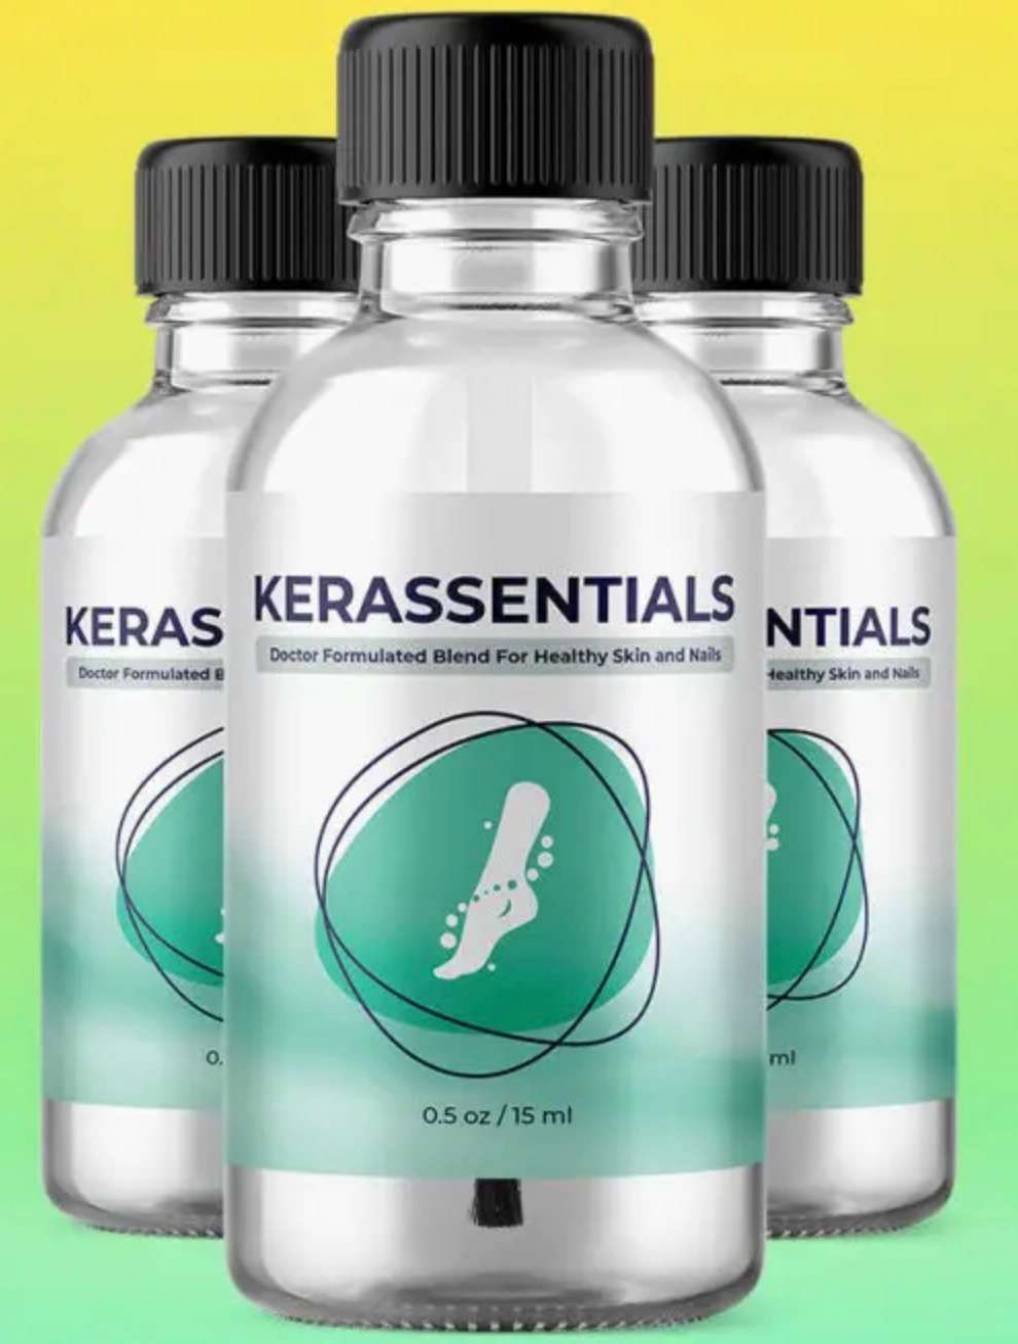 Is It Really Worth Buying Kerassentials